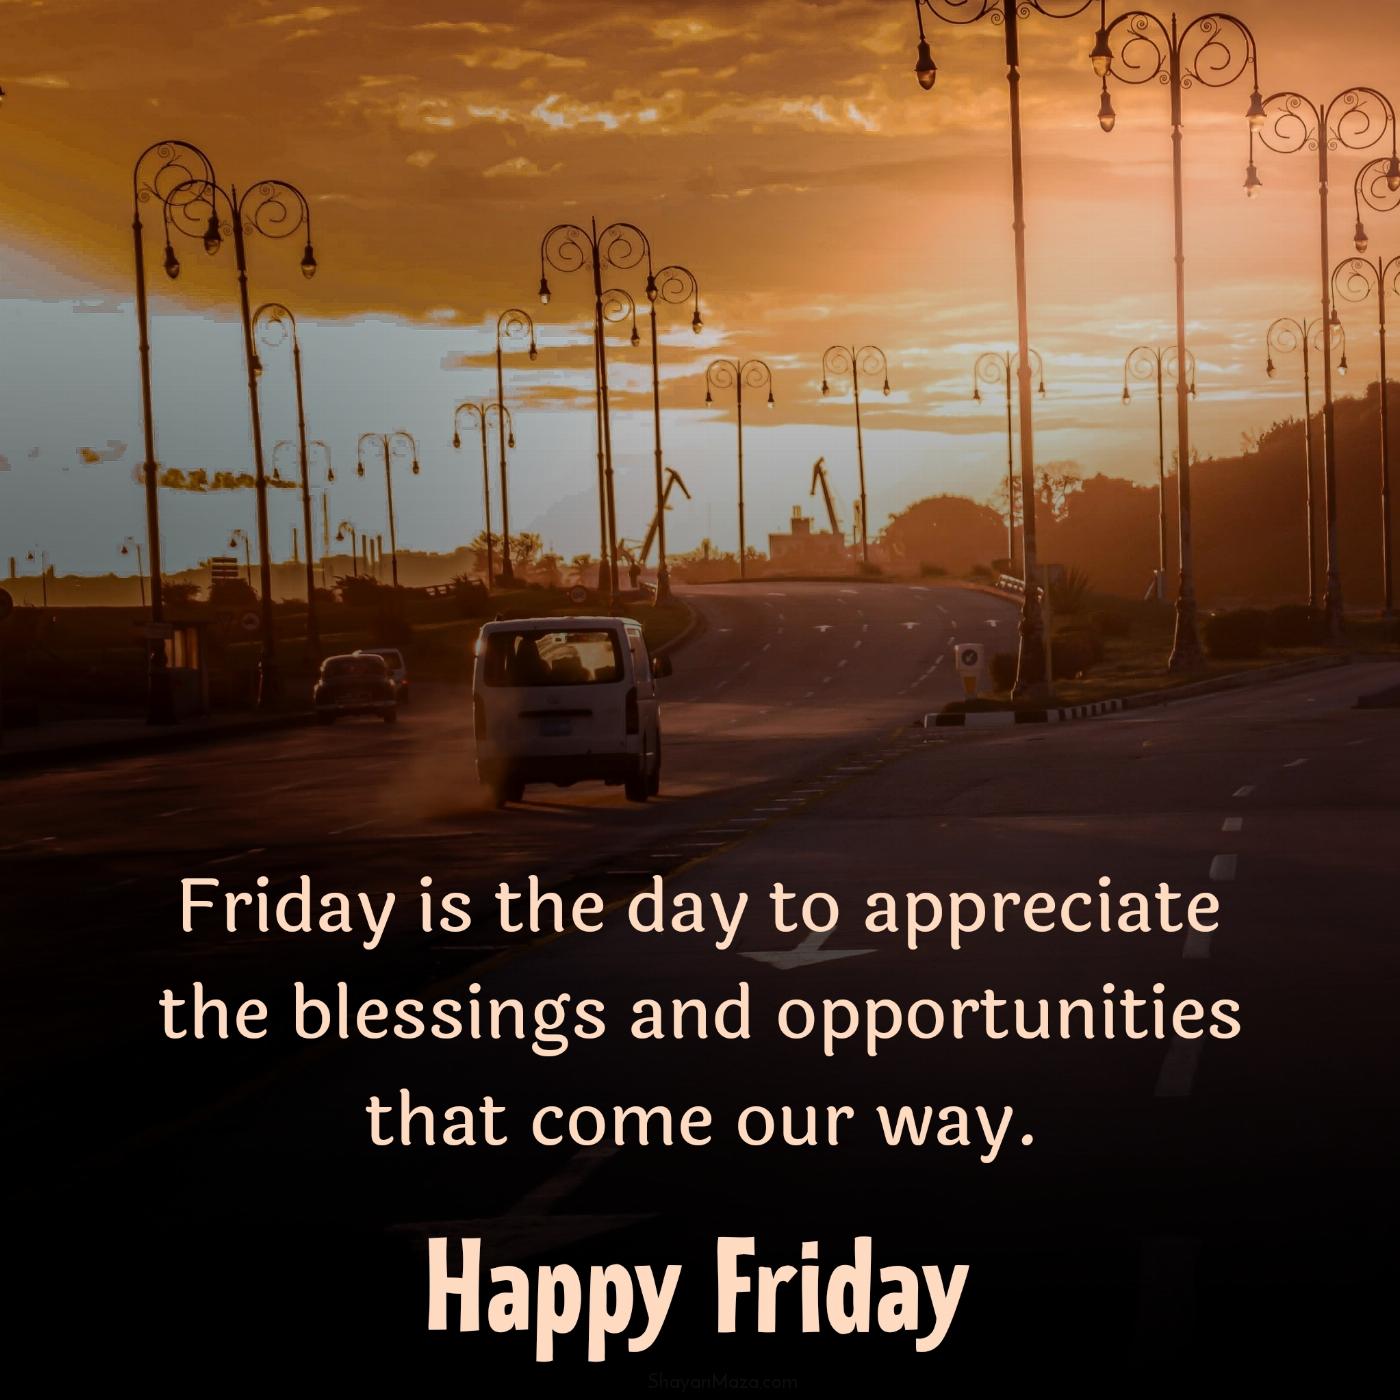 Friday is the day to appreciate the blessings and opportunities